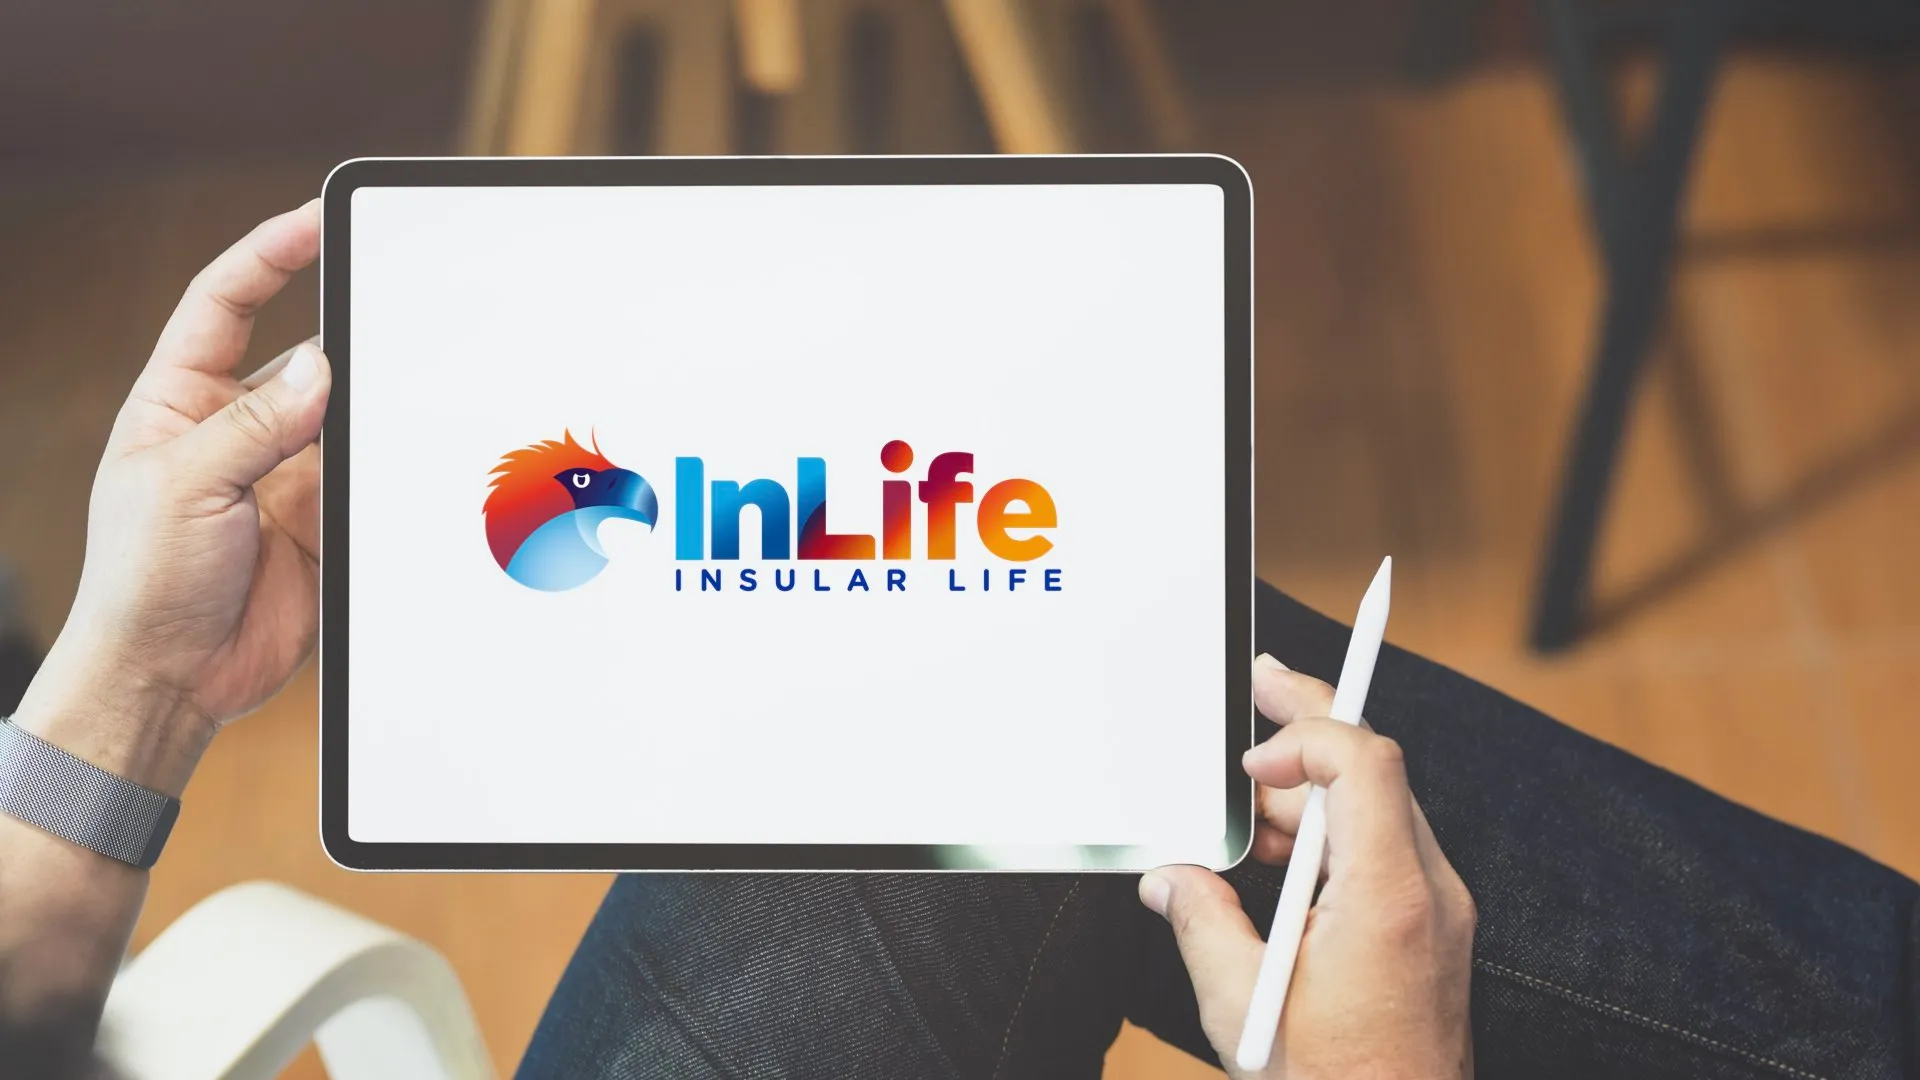 inlife-banks-on-fully-digital-online-payment-capability